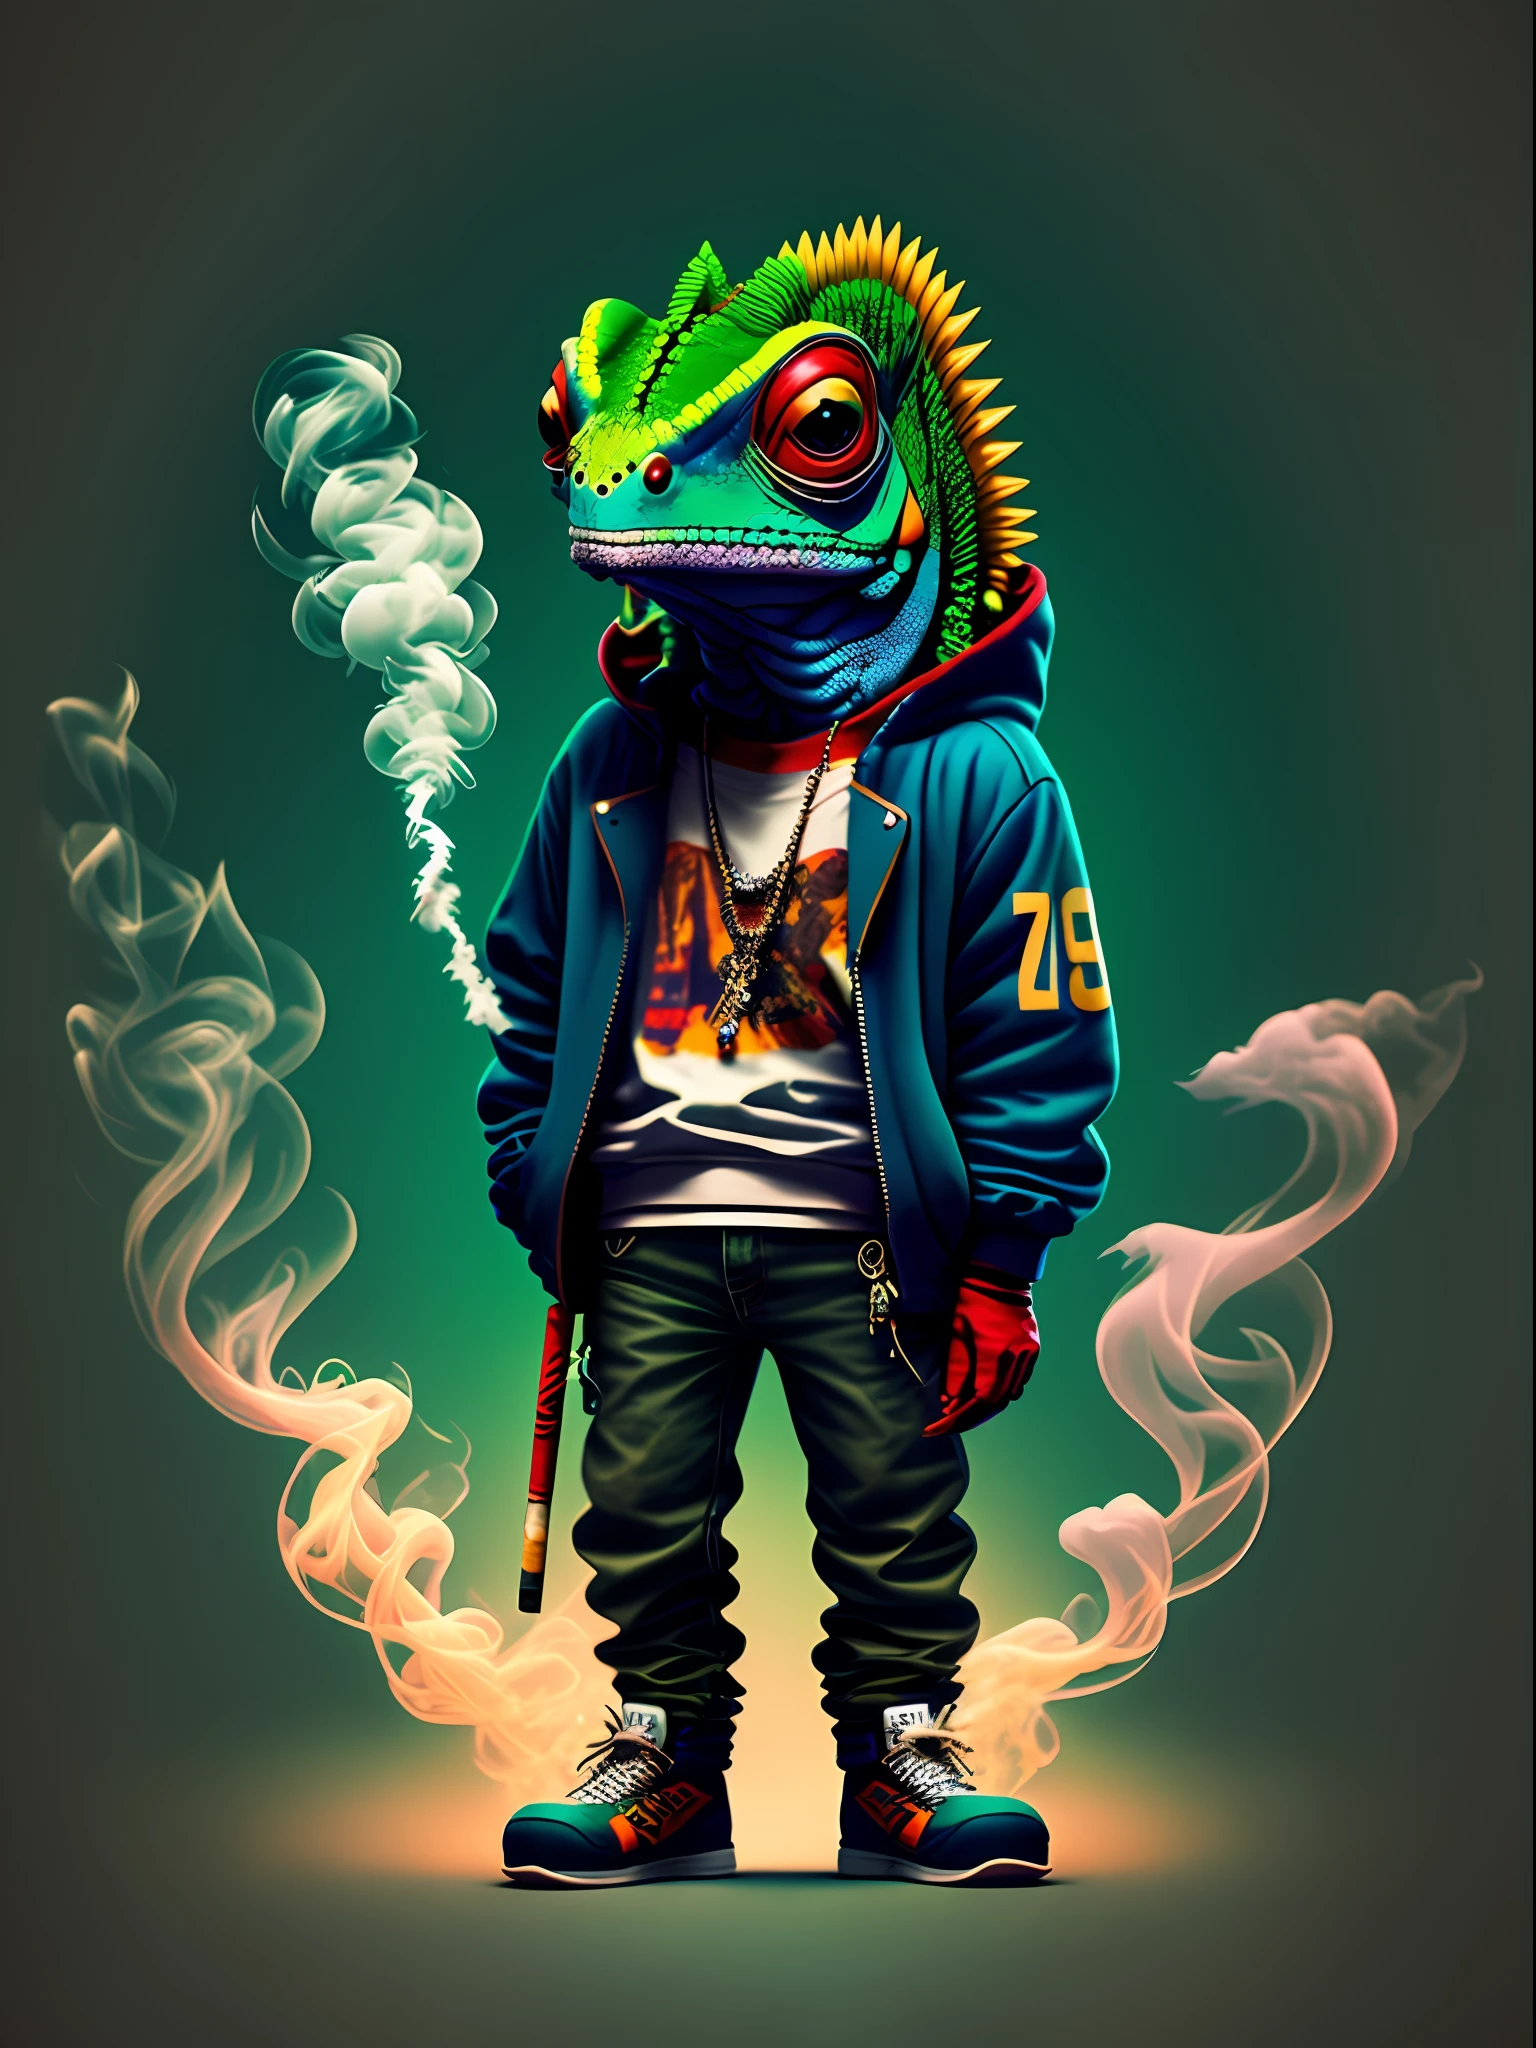 Image of a chameleon standing smoking a cigarette, wearing hip-hop style clothes, 90's style